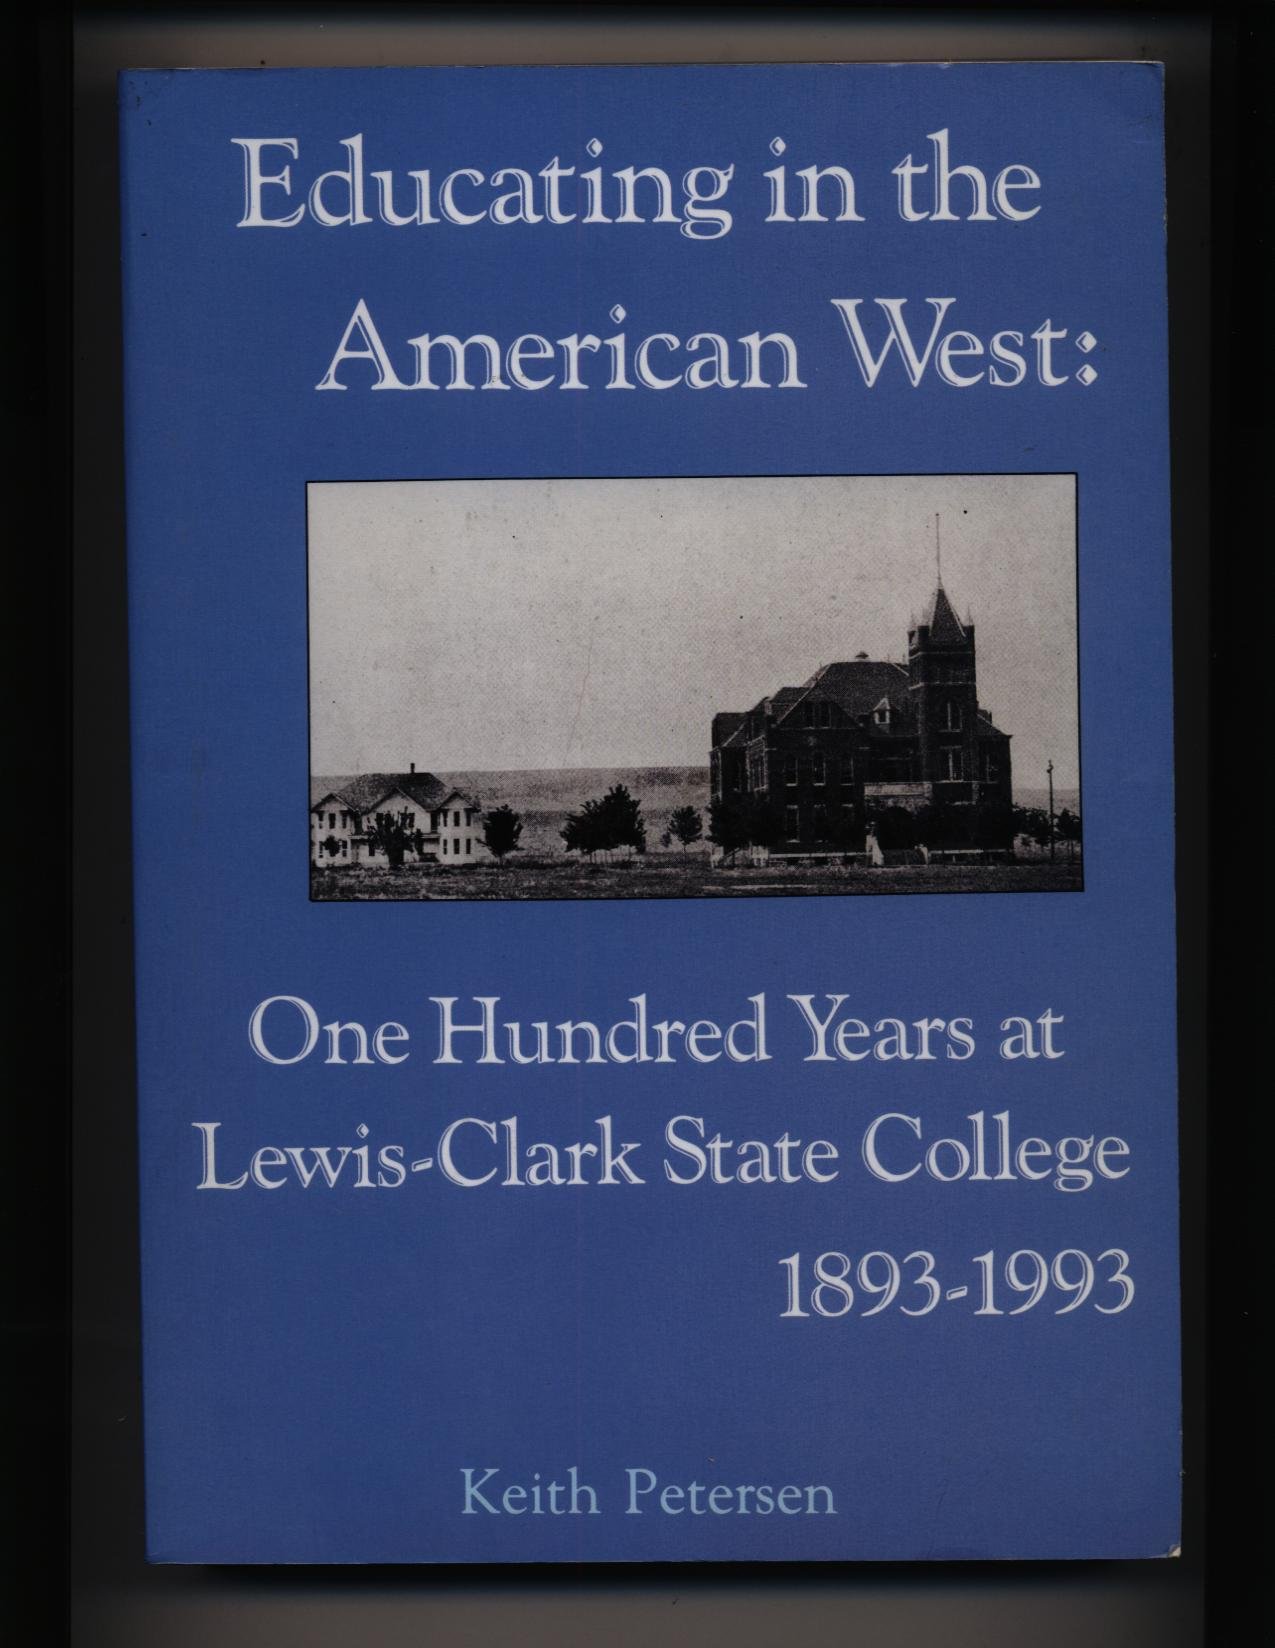 Educating in the American West: One hundred years at Lewis-Clark State College, 1893-1993 (book cover)